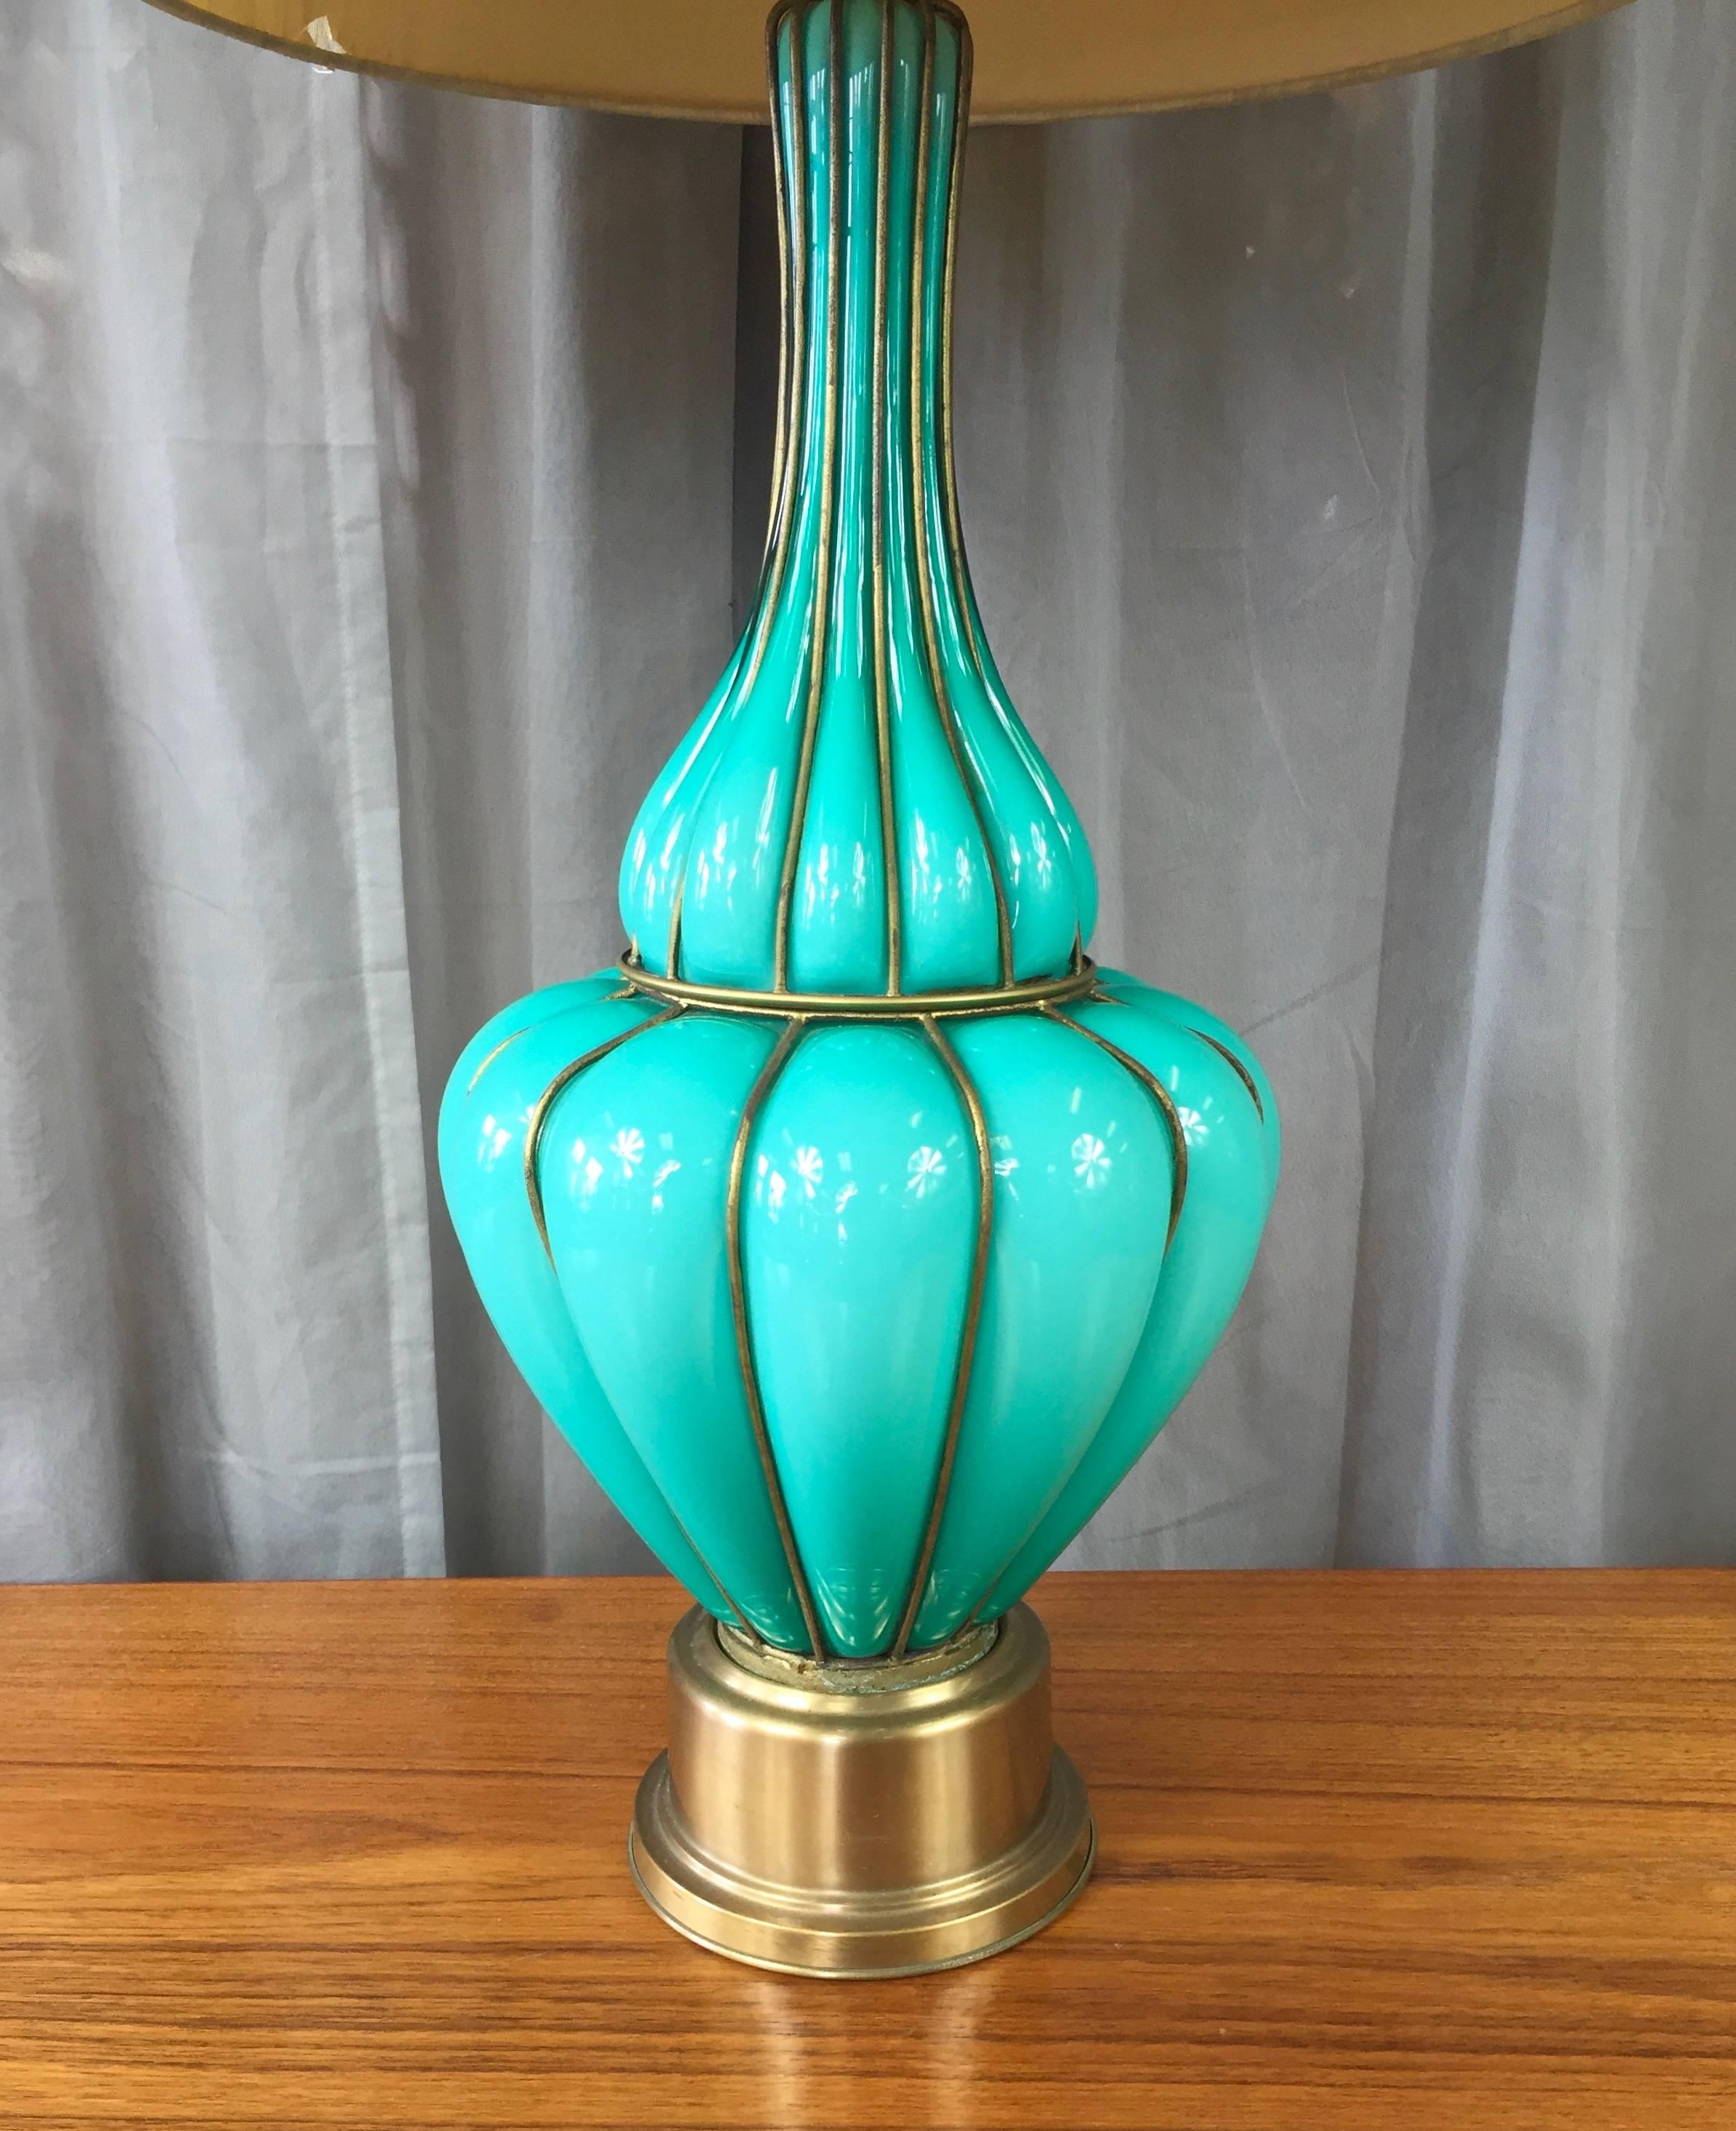 A very large and luminous Murano glass table lamp with brass base and stem and brass-colored wire cage and finial.

Opaque glass is an eye-catching and Classic Venetian shade of turquoise. Curvaceously emerges from the wire cage into which it was